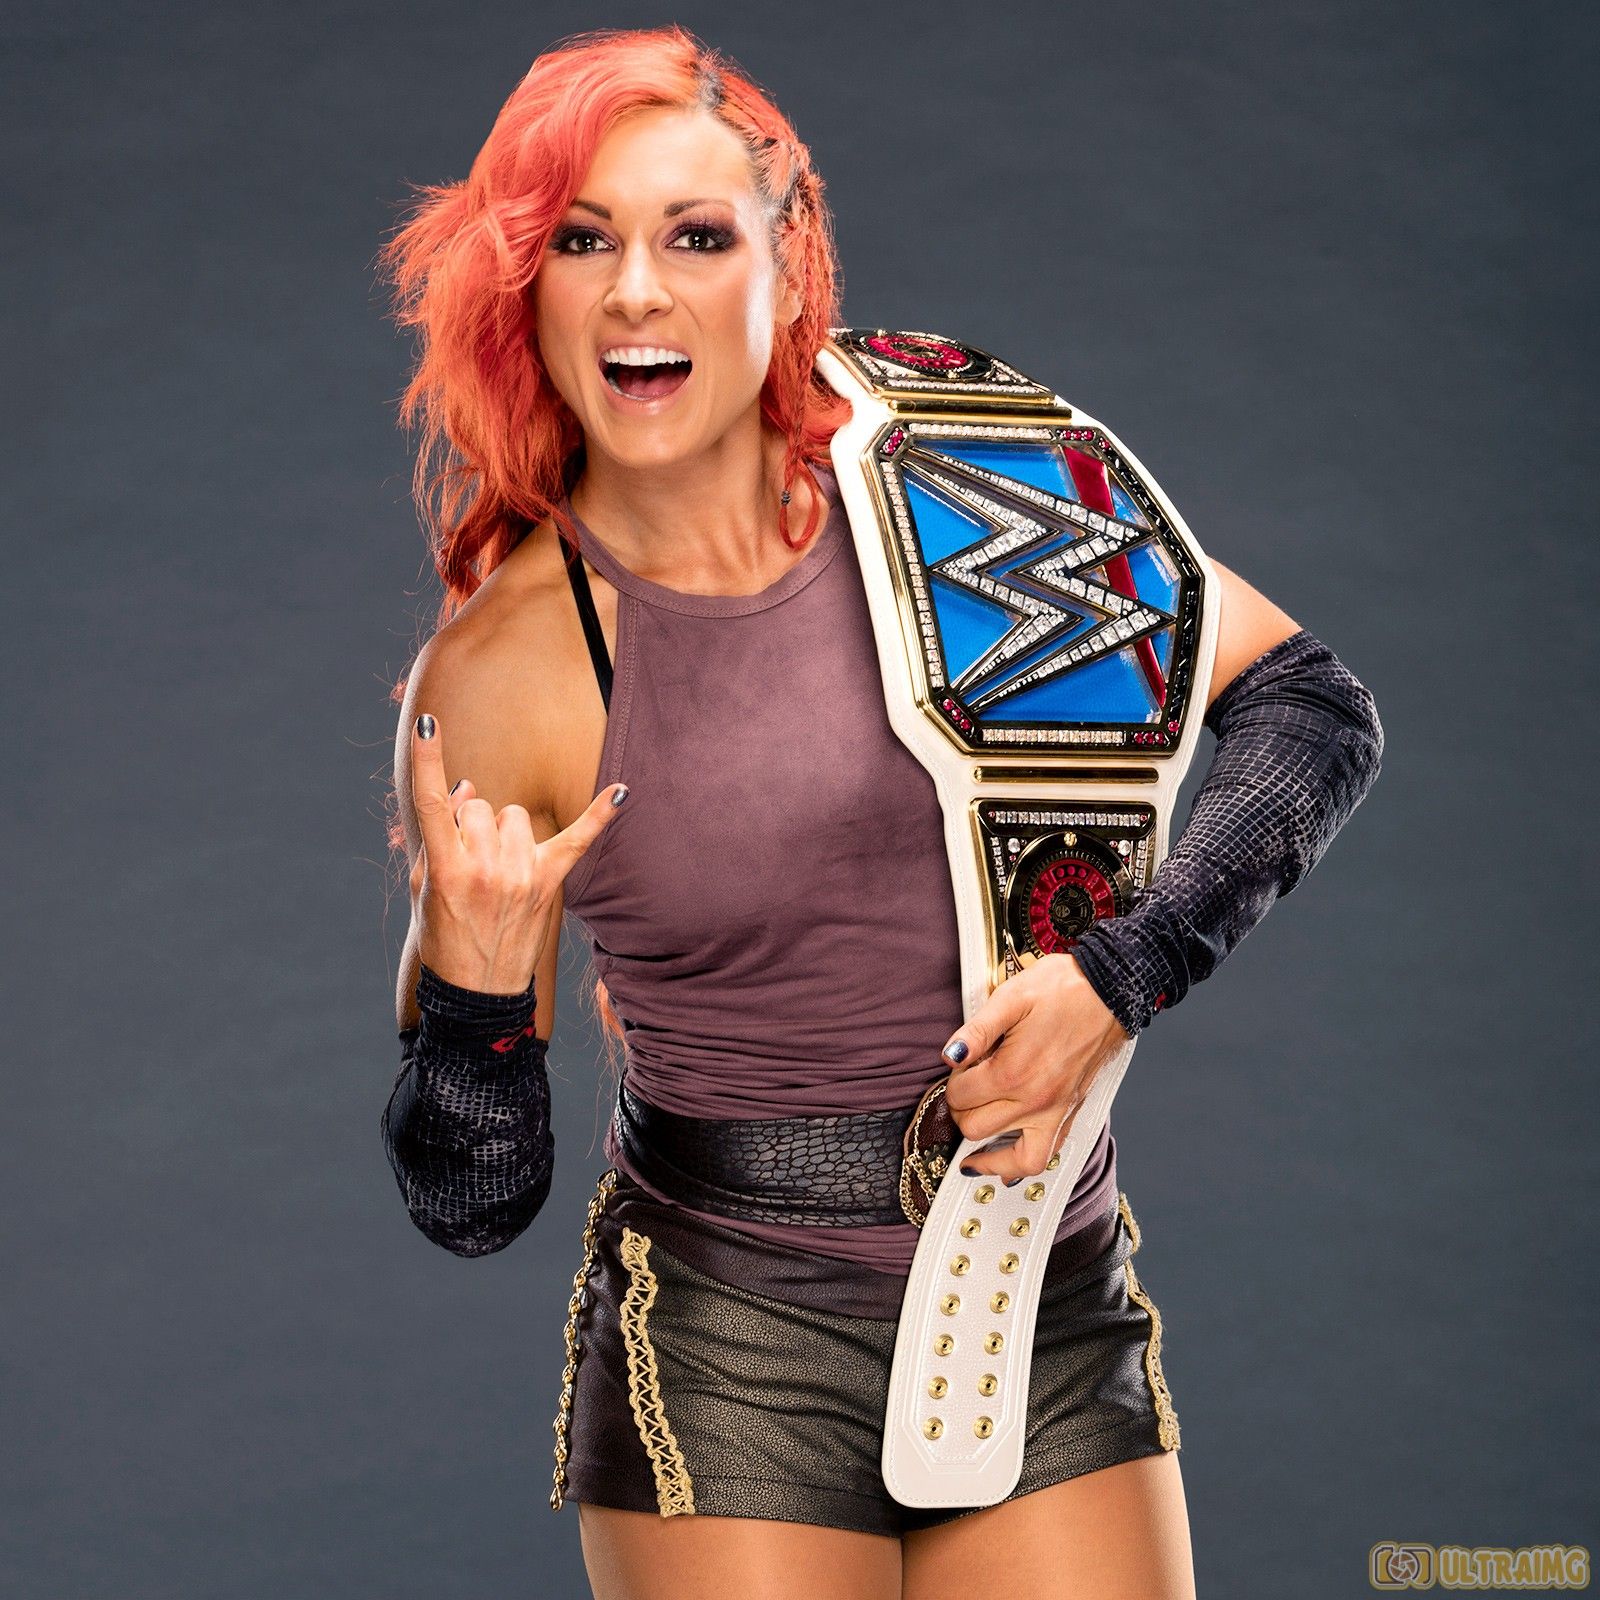 Becky Lynch shows off her SmackDown Women's Championship